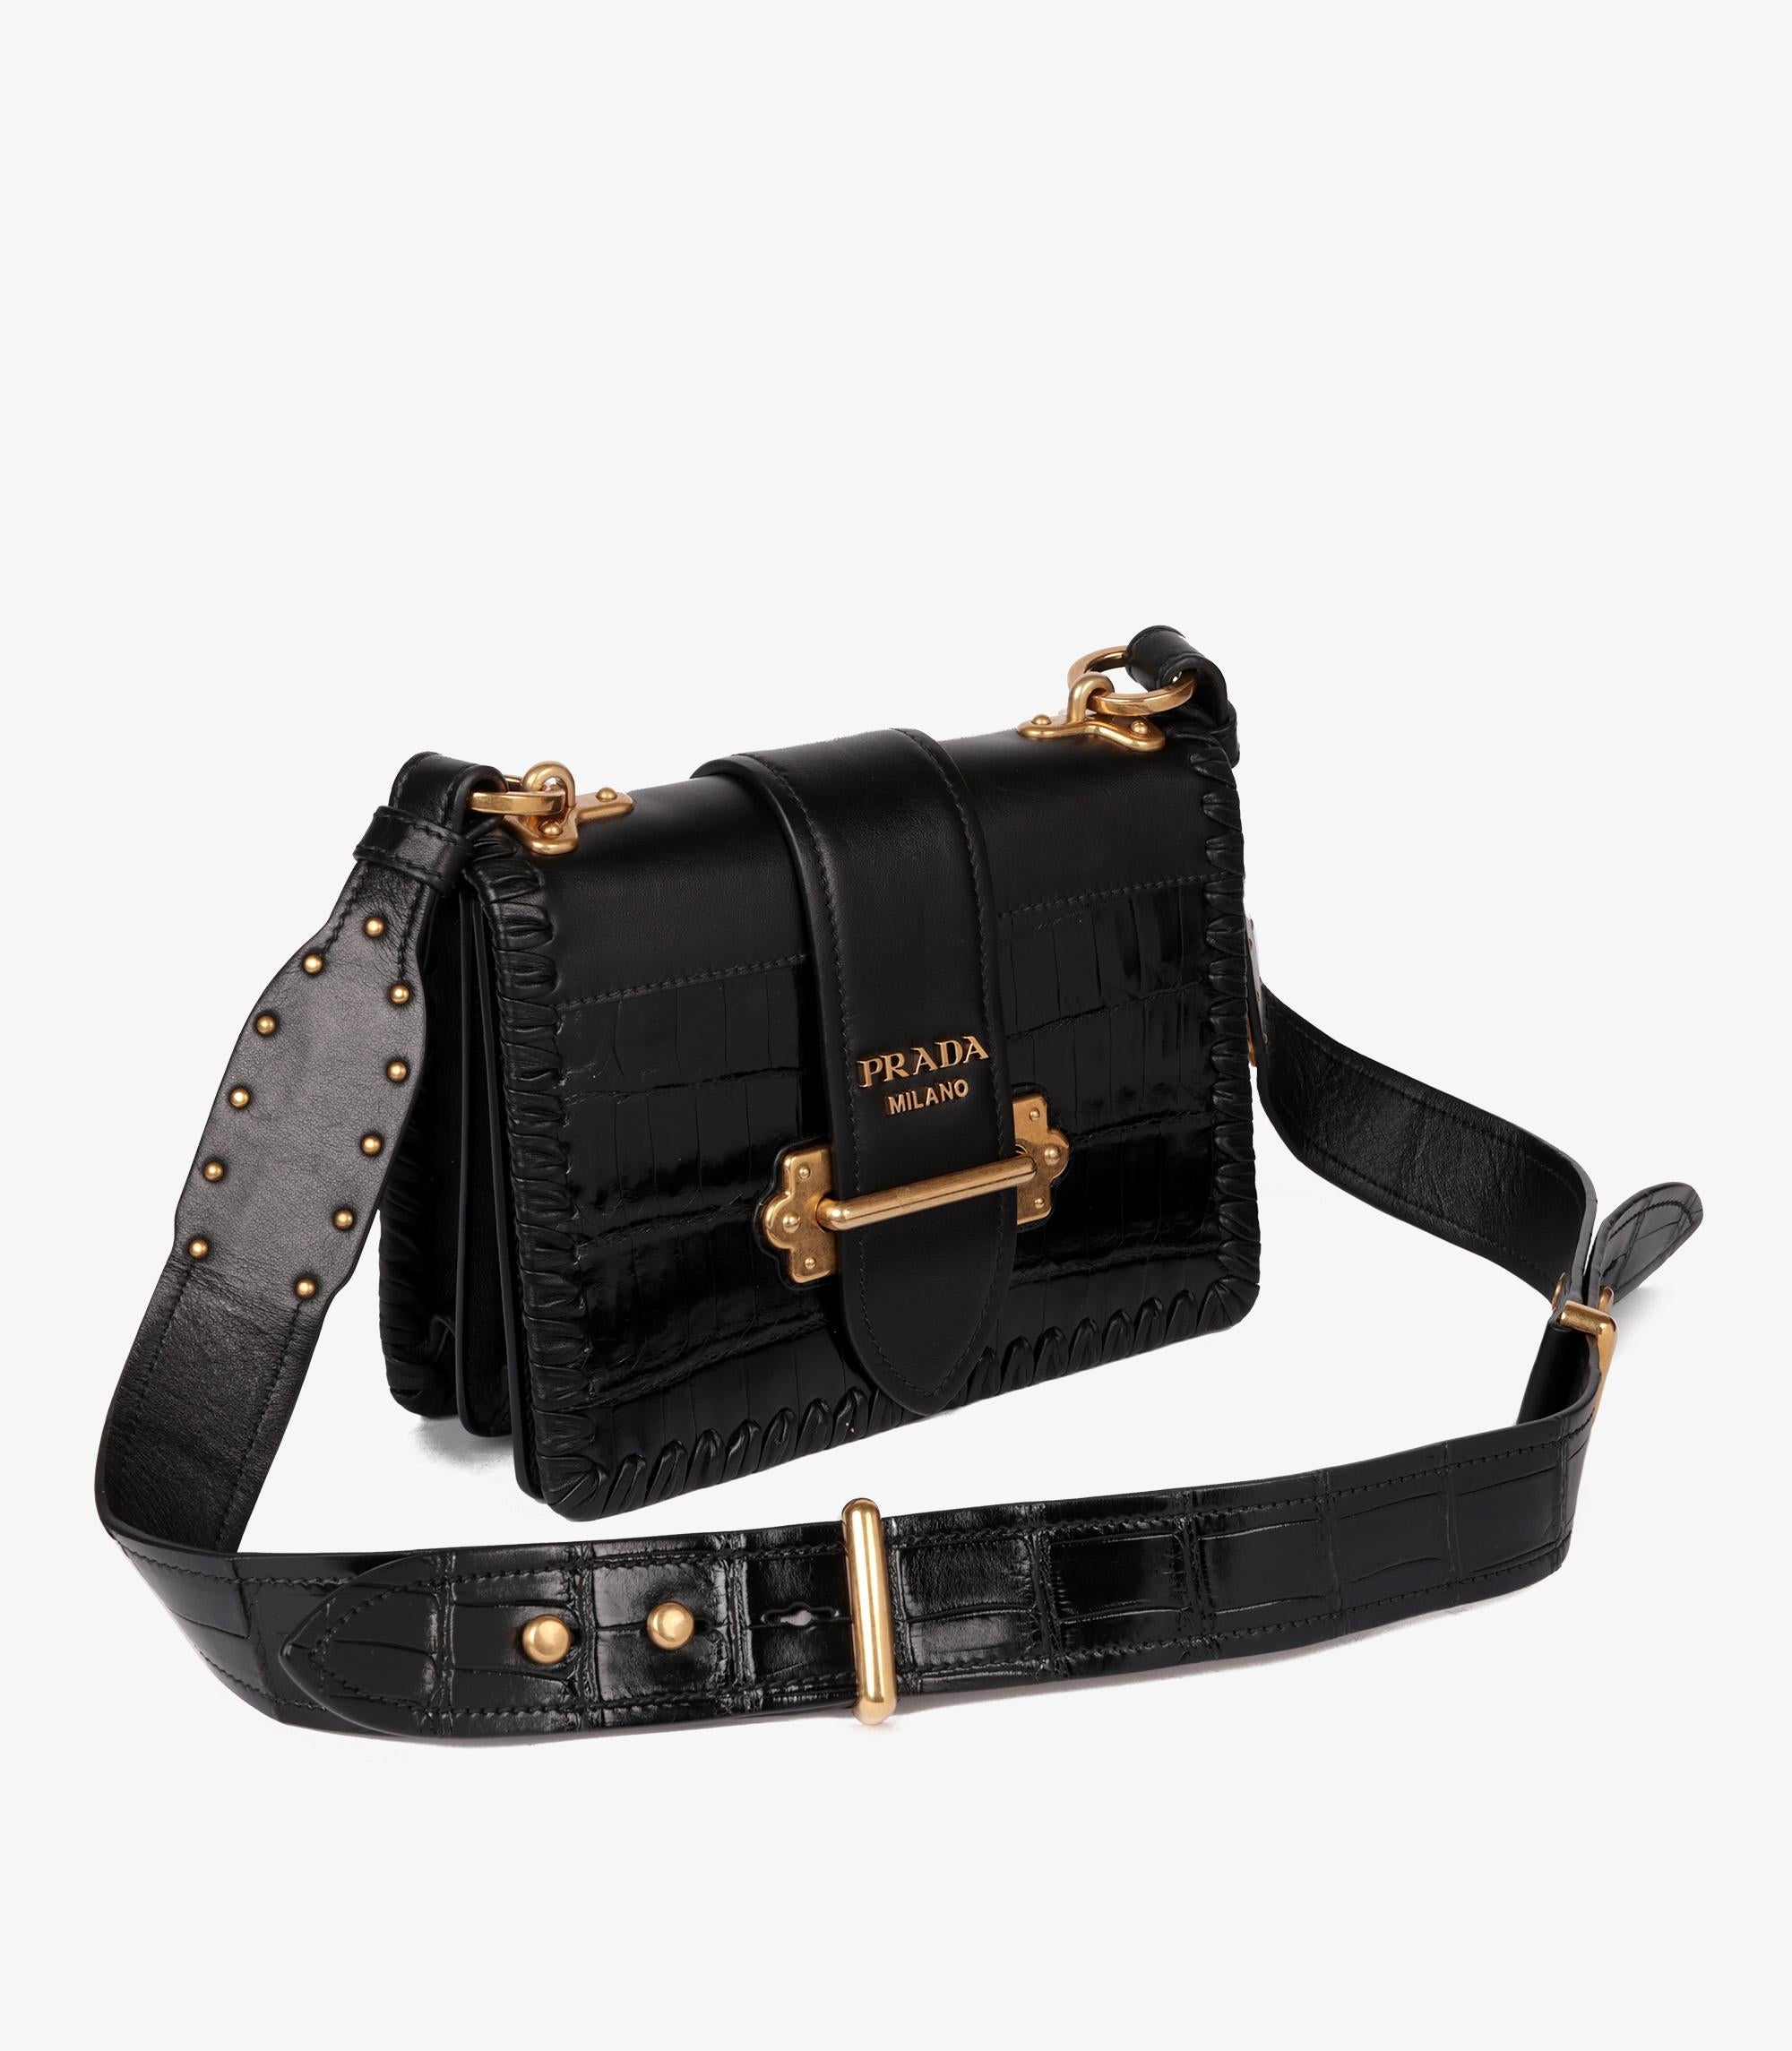 Prada Black Smooth Calfskin & Matte Crocodile Leather Cahier

Brand- Prada
Model- Cahier
Product Type- Crossbody, Shoulder
Serial Number- **
Age- Circa 2017
Accompanied By- Prada Dust Bag, Care Booklet, Authenticity Card
Colour- Black
Hardware-